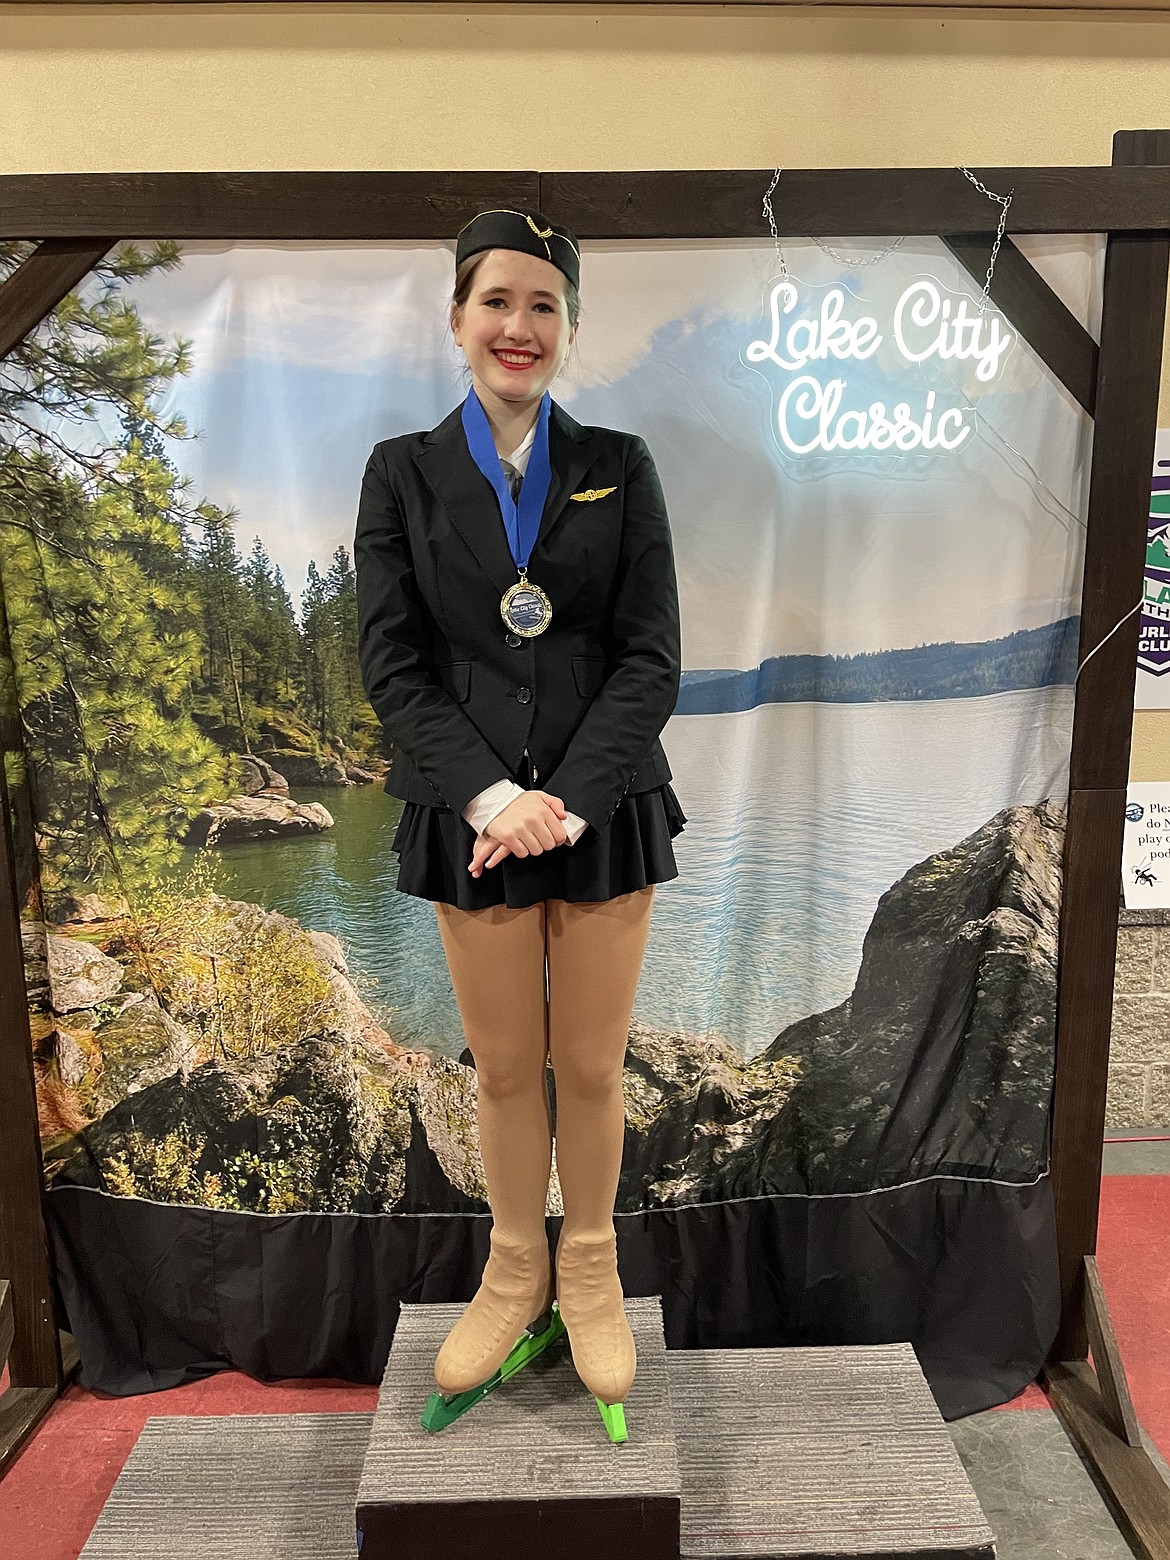 Courtesy photo 
Anya Newcombe, part of the Lake City Figure Skating program of the Spokane Figure Skating Club, which hosted the Lake City Classic on May 17-19 at the Frontier Ice Arena in Coeur d'Alene.